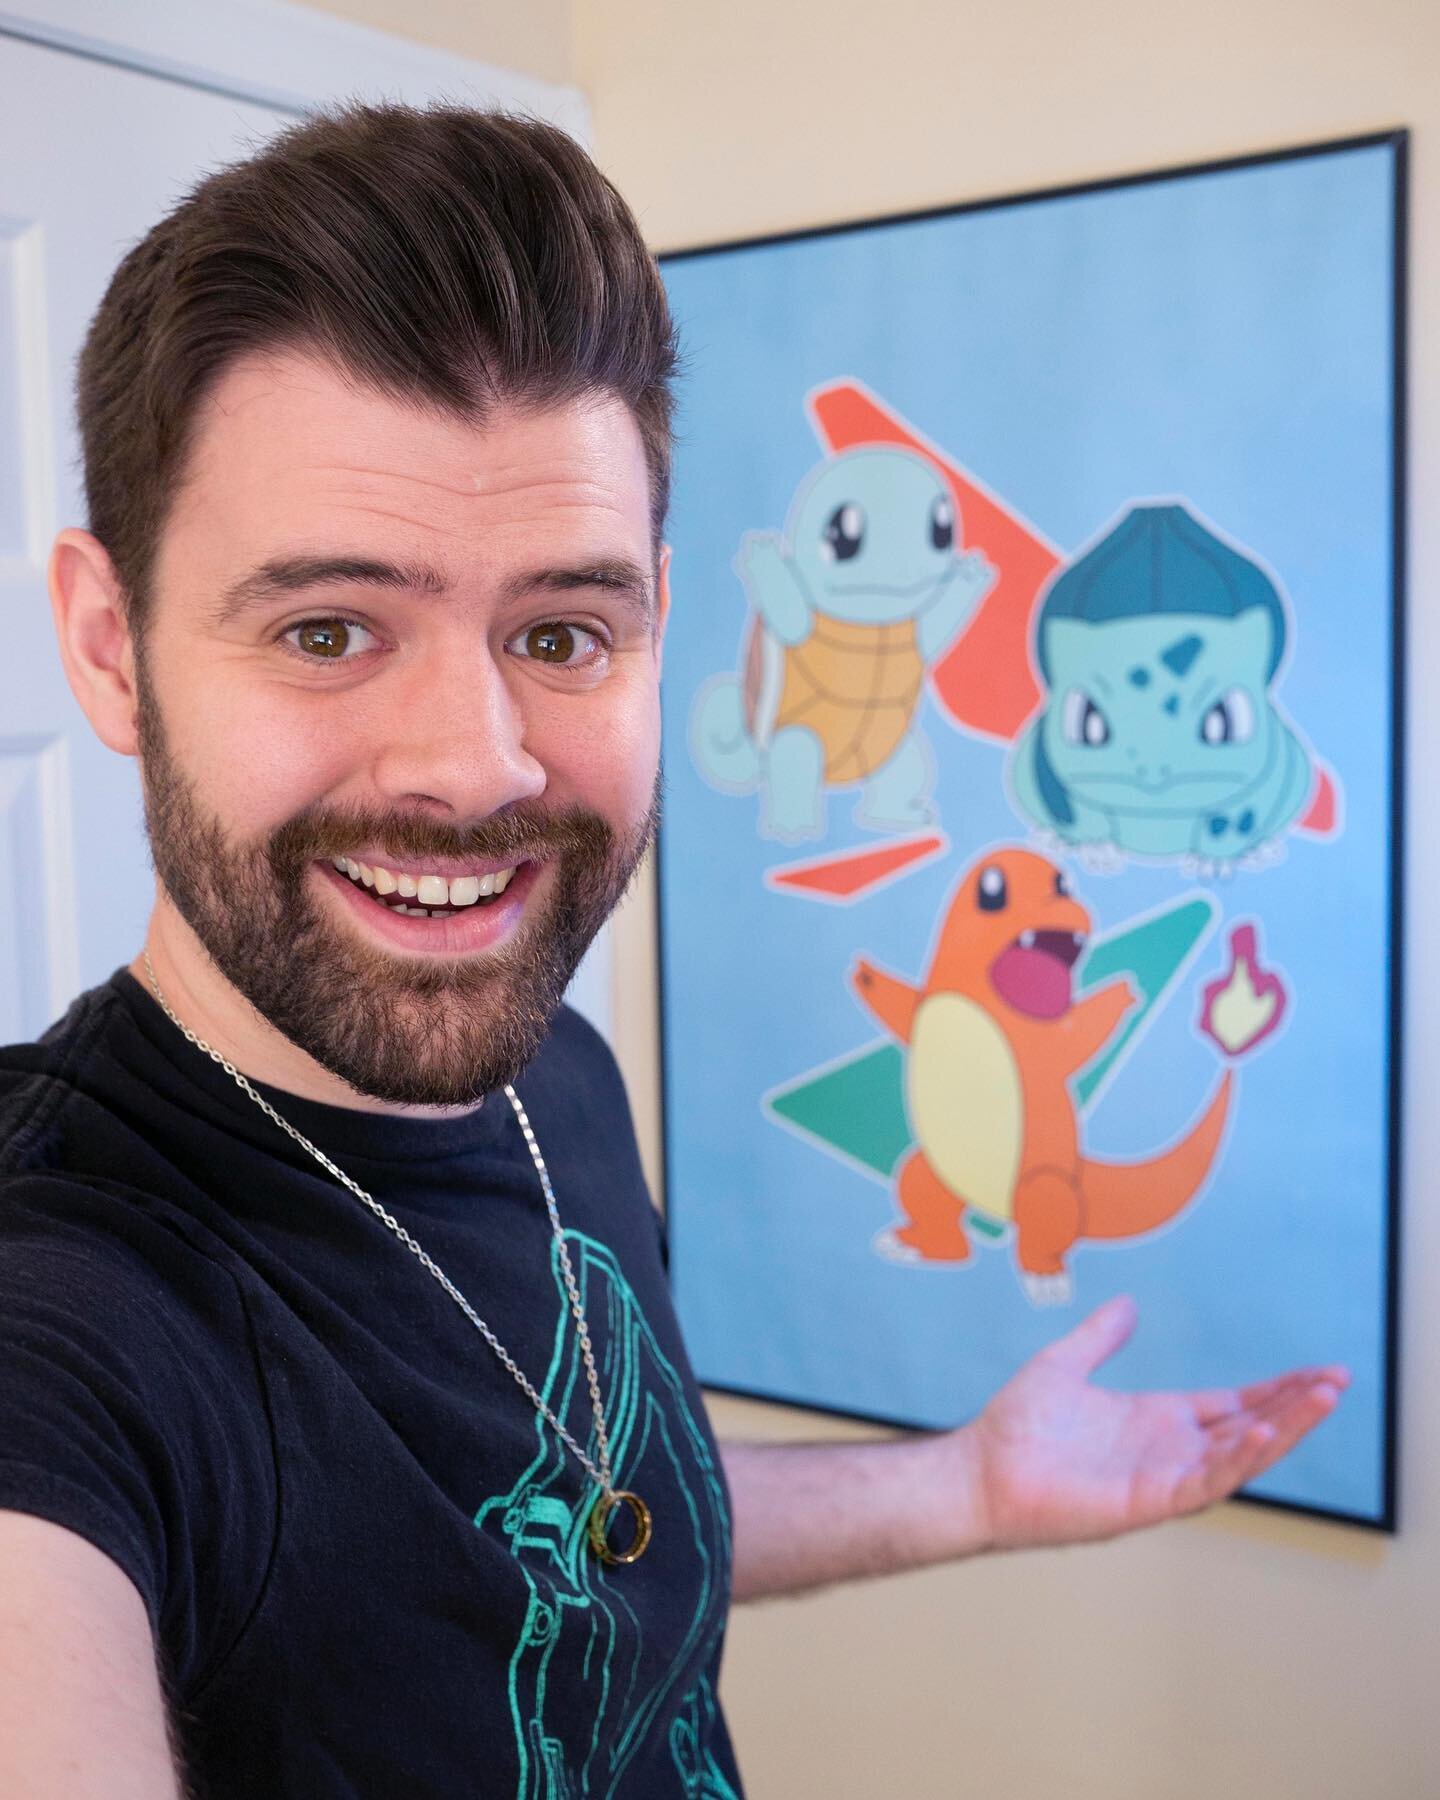 Who's your favorite starter? 🔥🍃💧 
In celebration of Pokemon's 25 anniversary I'll be starting my Pokemon Blue playthrough on twitch this Saturday!! So tune in at 2:22 PM PST on February 27th (link in bio) as we leave Pallet Town and embark on the 